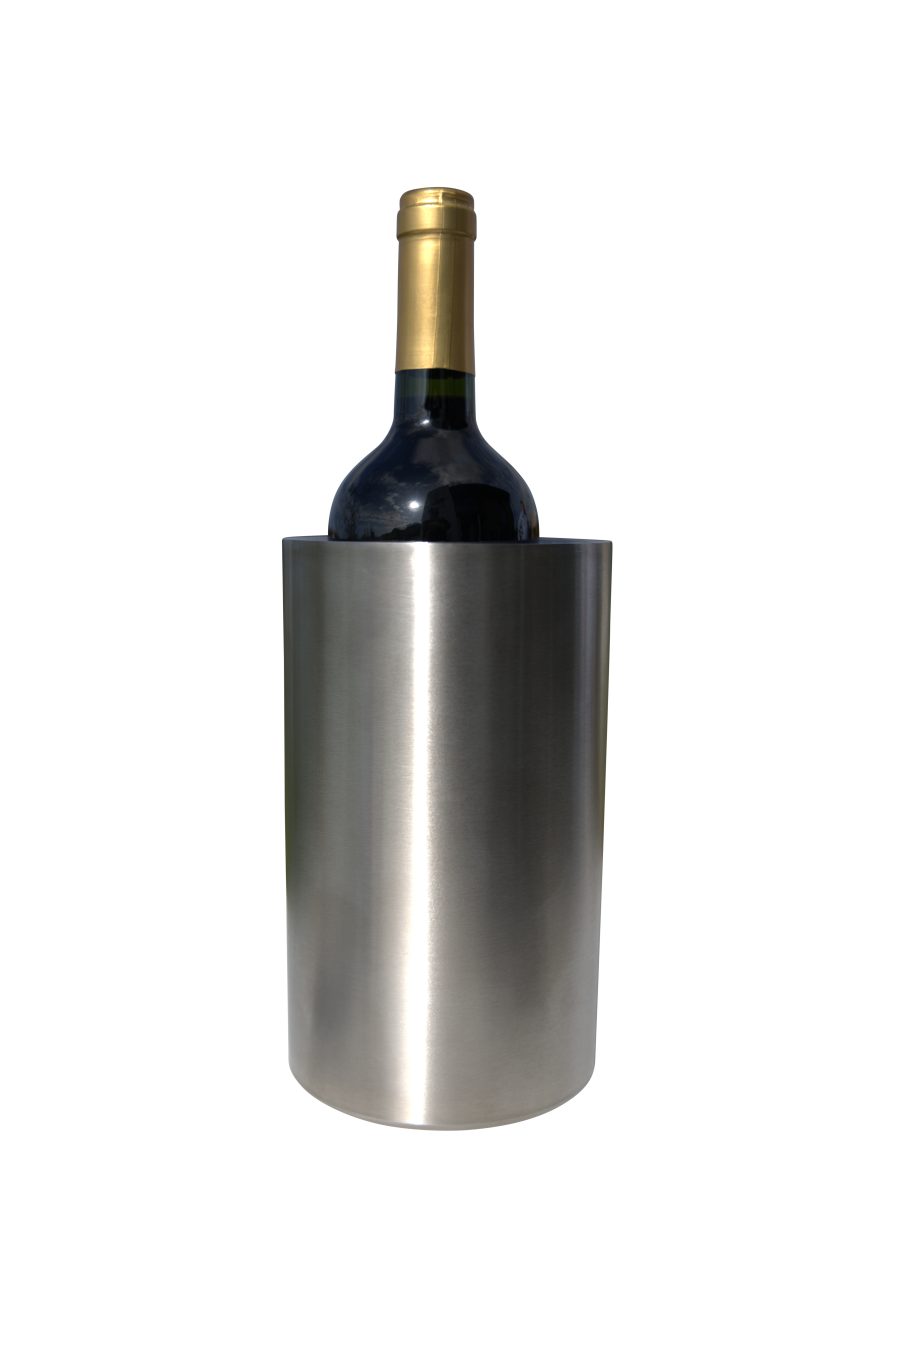 Insulated Wine Cooler